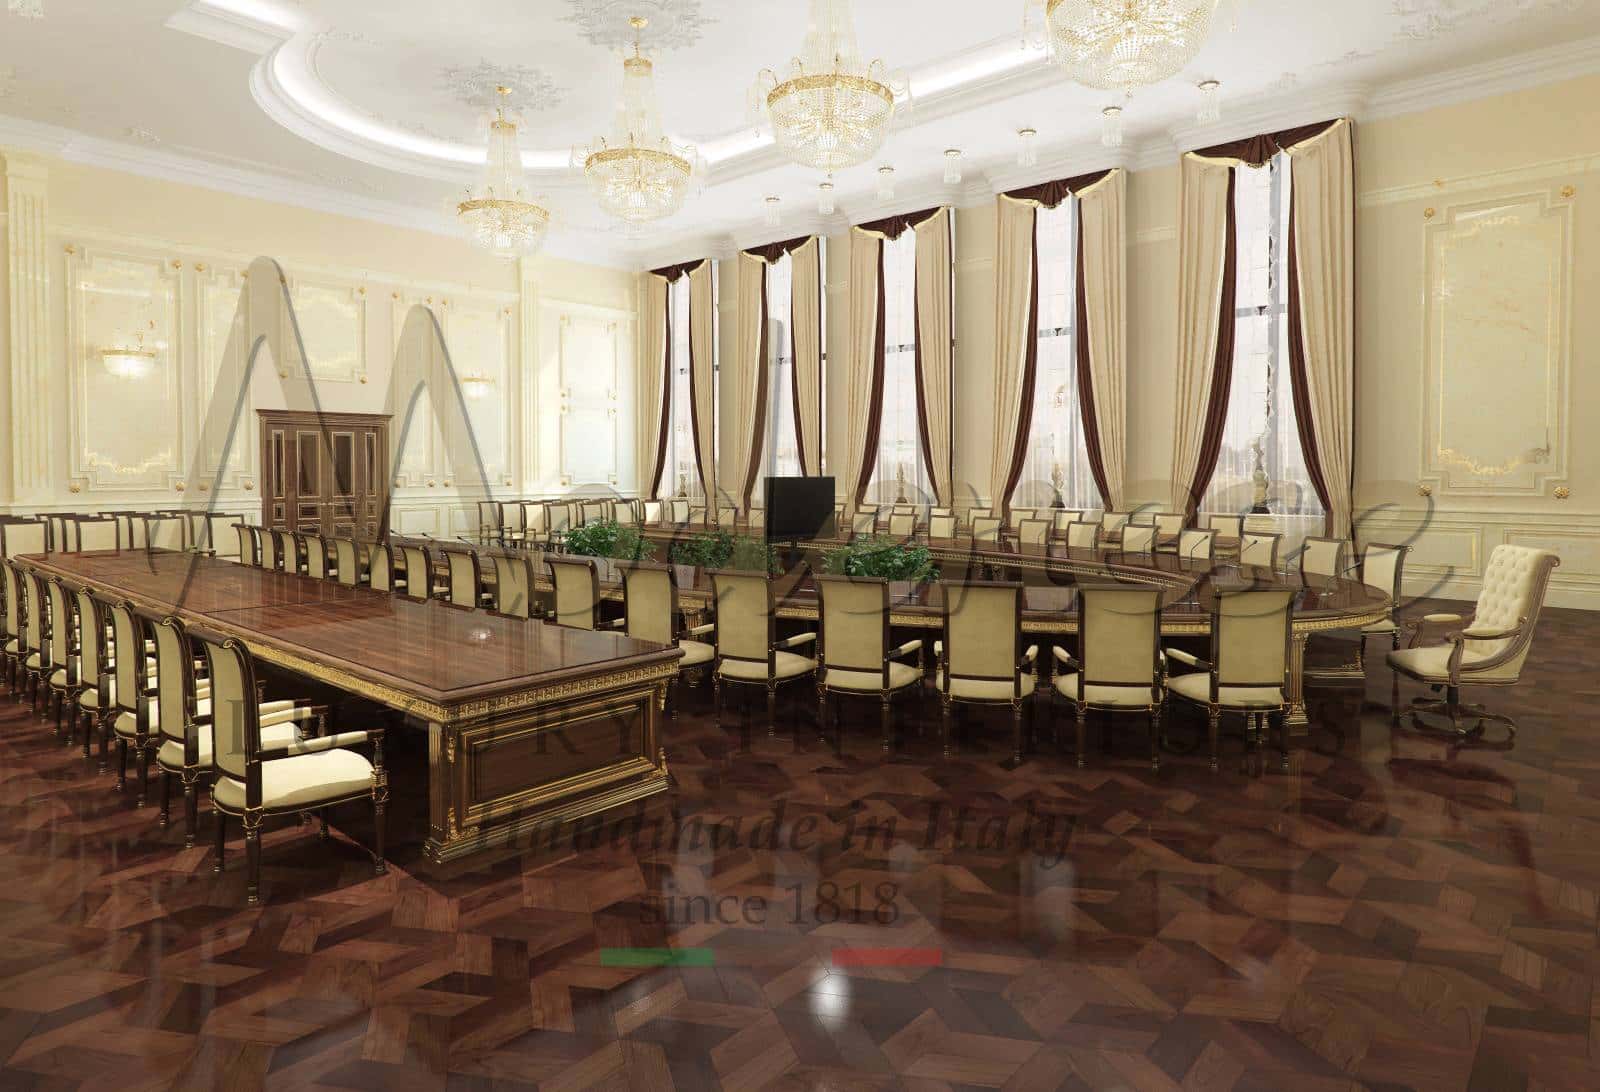 presidential executive offices embassies governamental office project selection handmade artisans layout ideas interior design service consult ideas french style classic luxury royal majestic elegant space refined baroque opulent custom fit out furniture production handcrafted italian quality high selection best classic classy baroque victorian rococo' exclusive fit out project